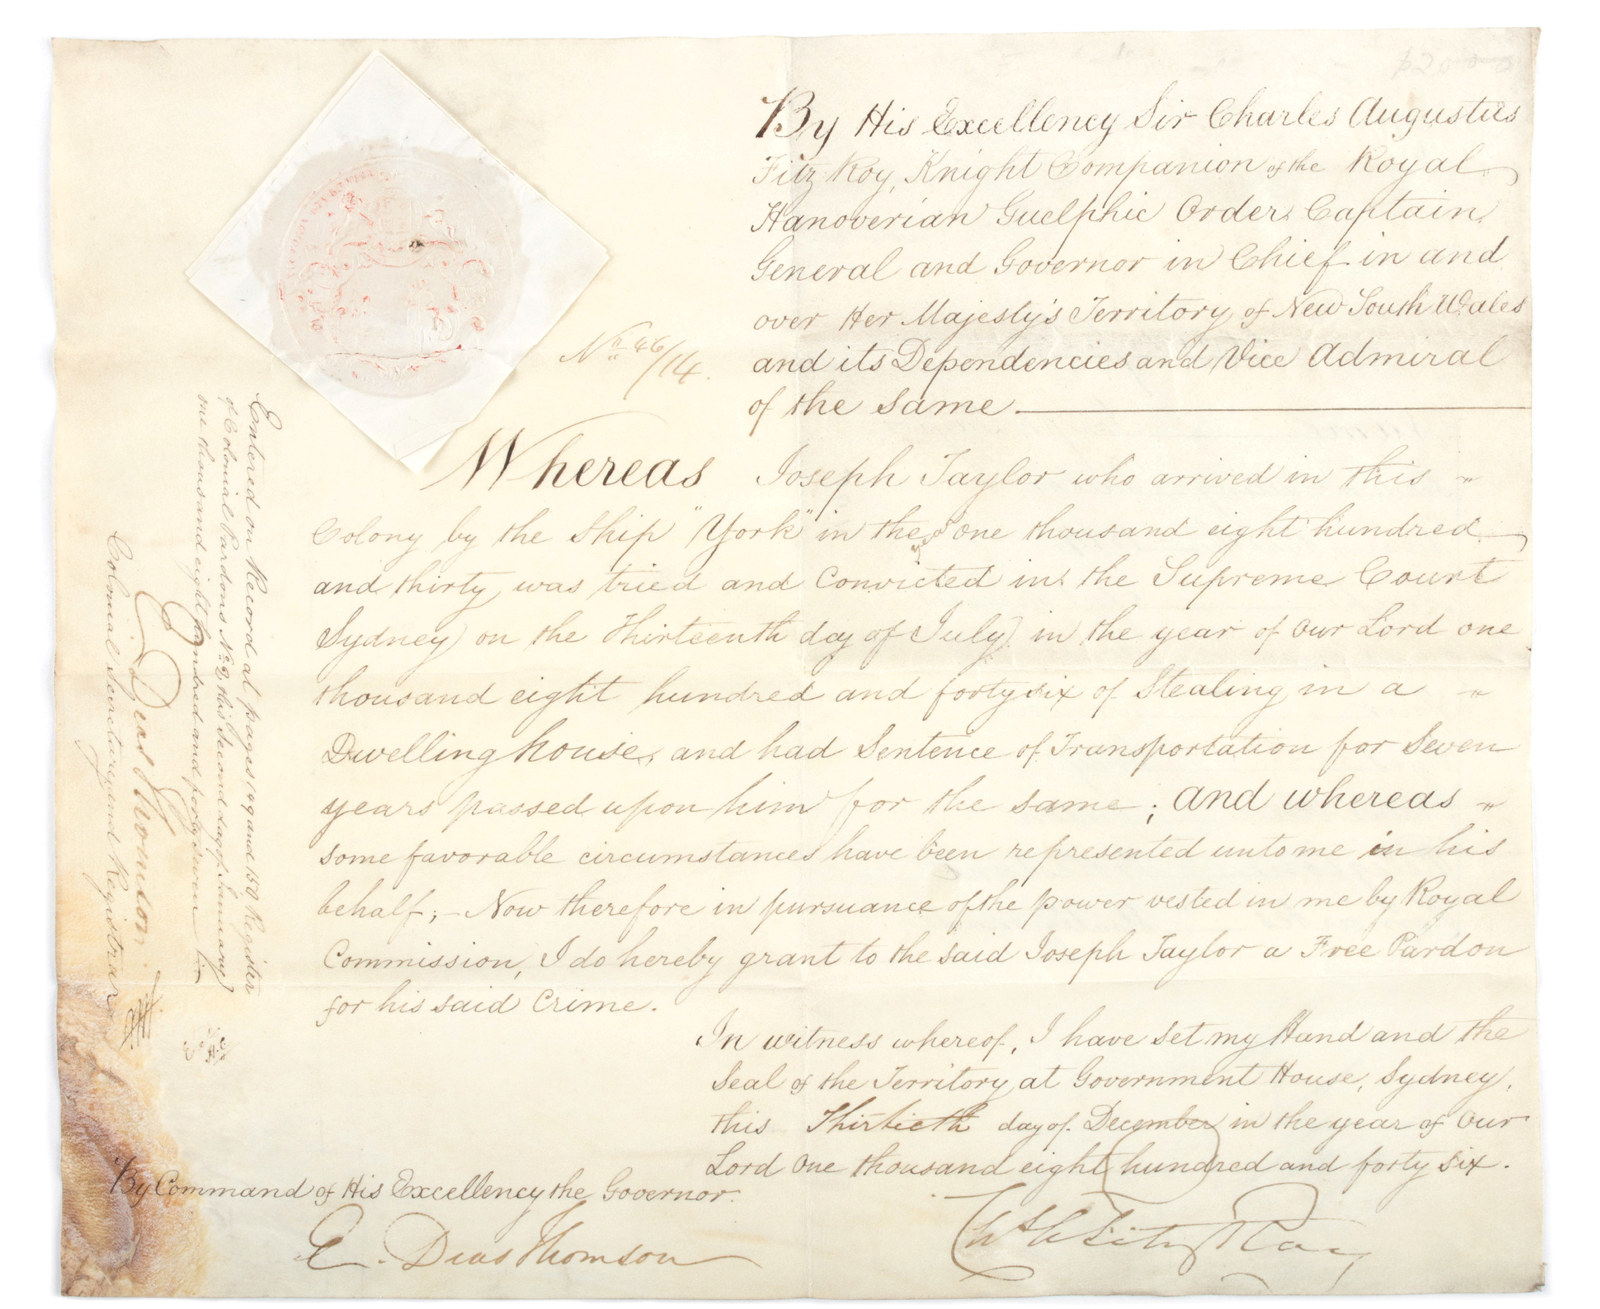 Paper handwritten document with signature and stamp.